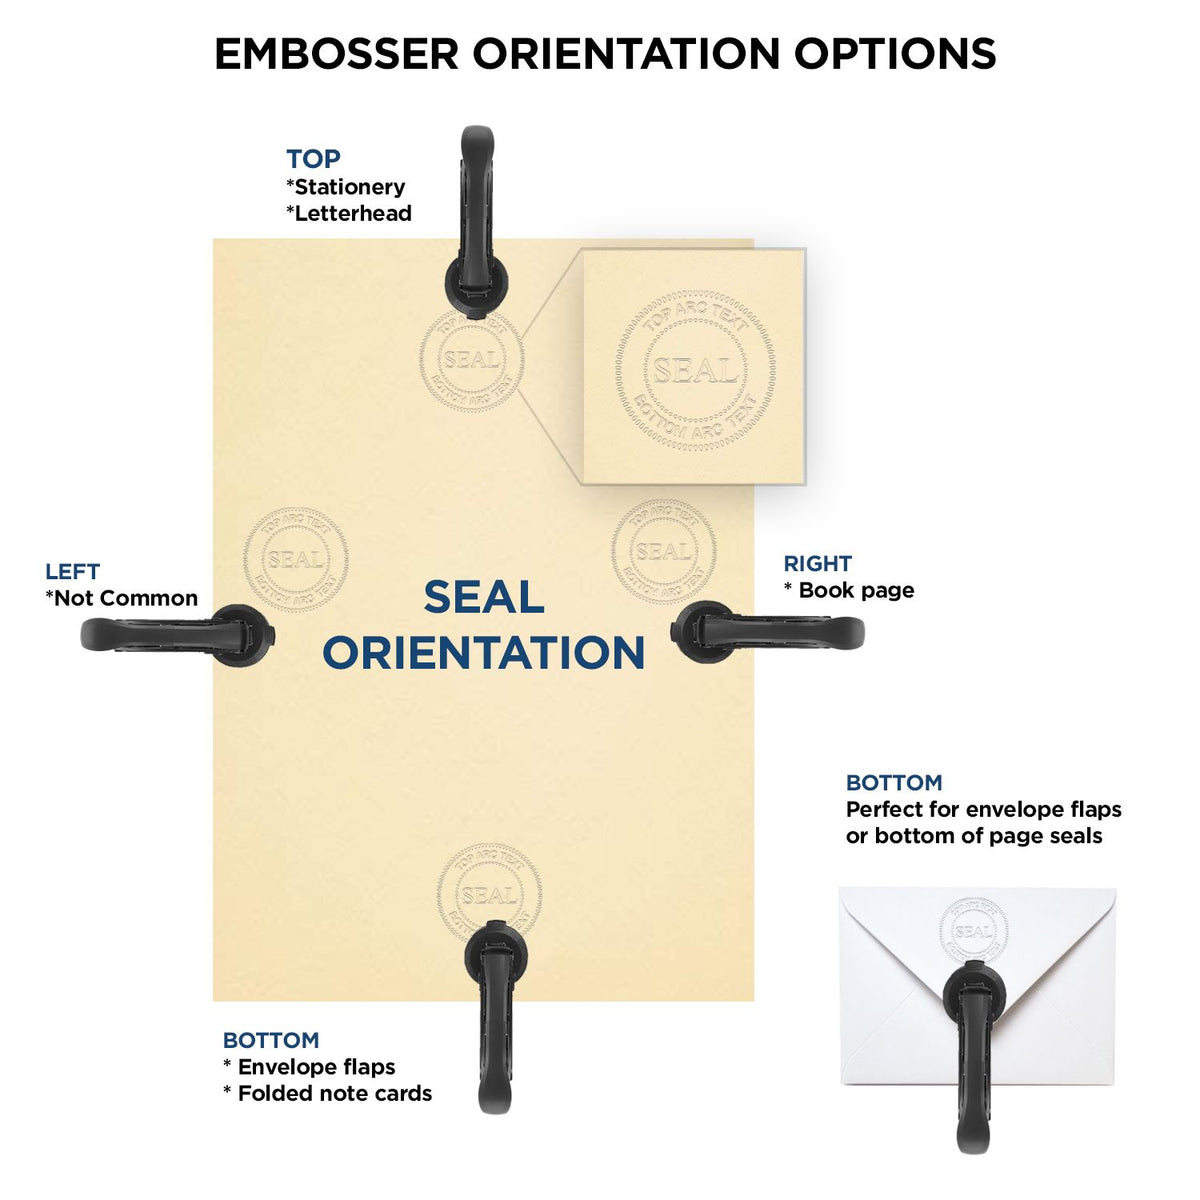 An infographic for the Handheld Colorado Architect Seal Embosser showing embosser orientation, this is showing examples of a top, bottom, right and left insert.